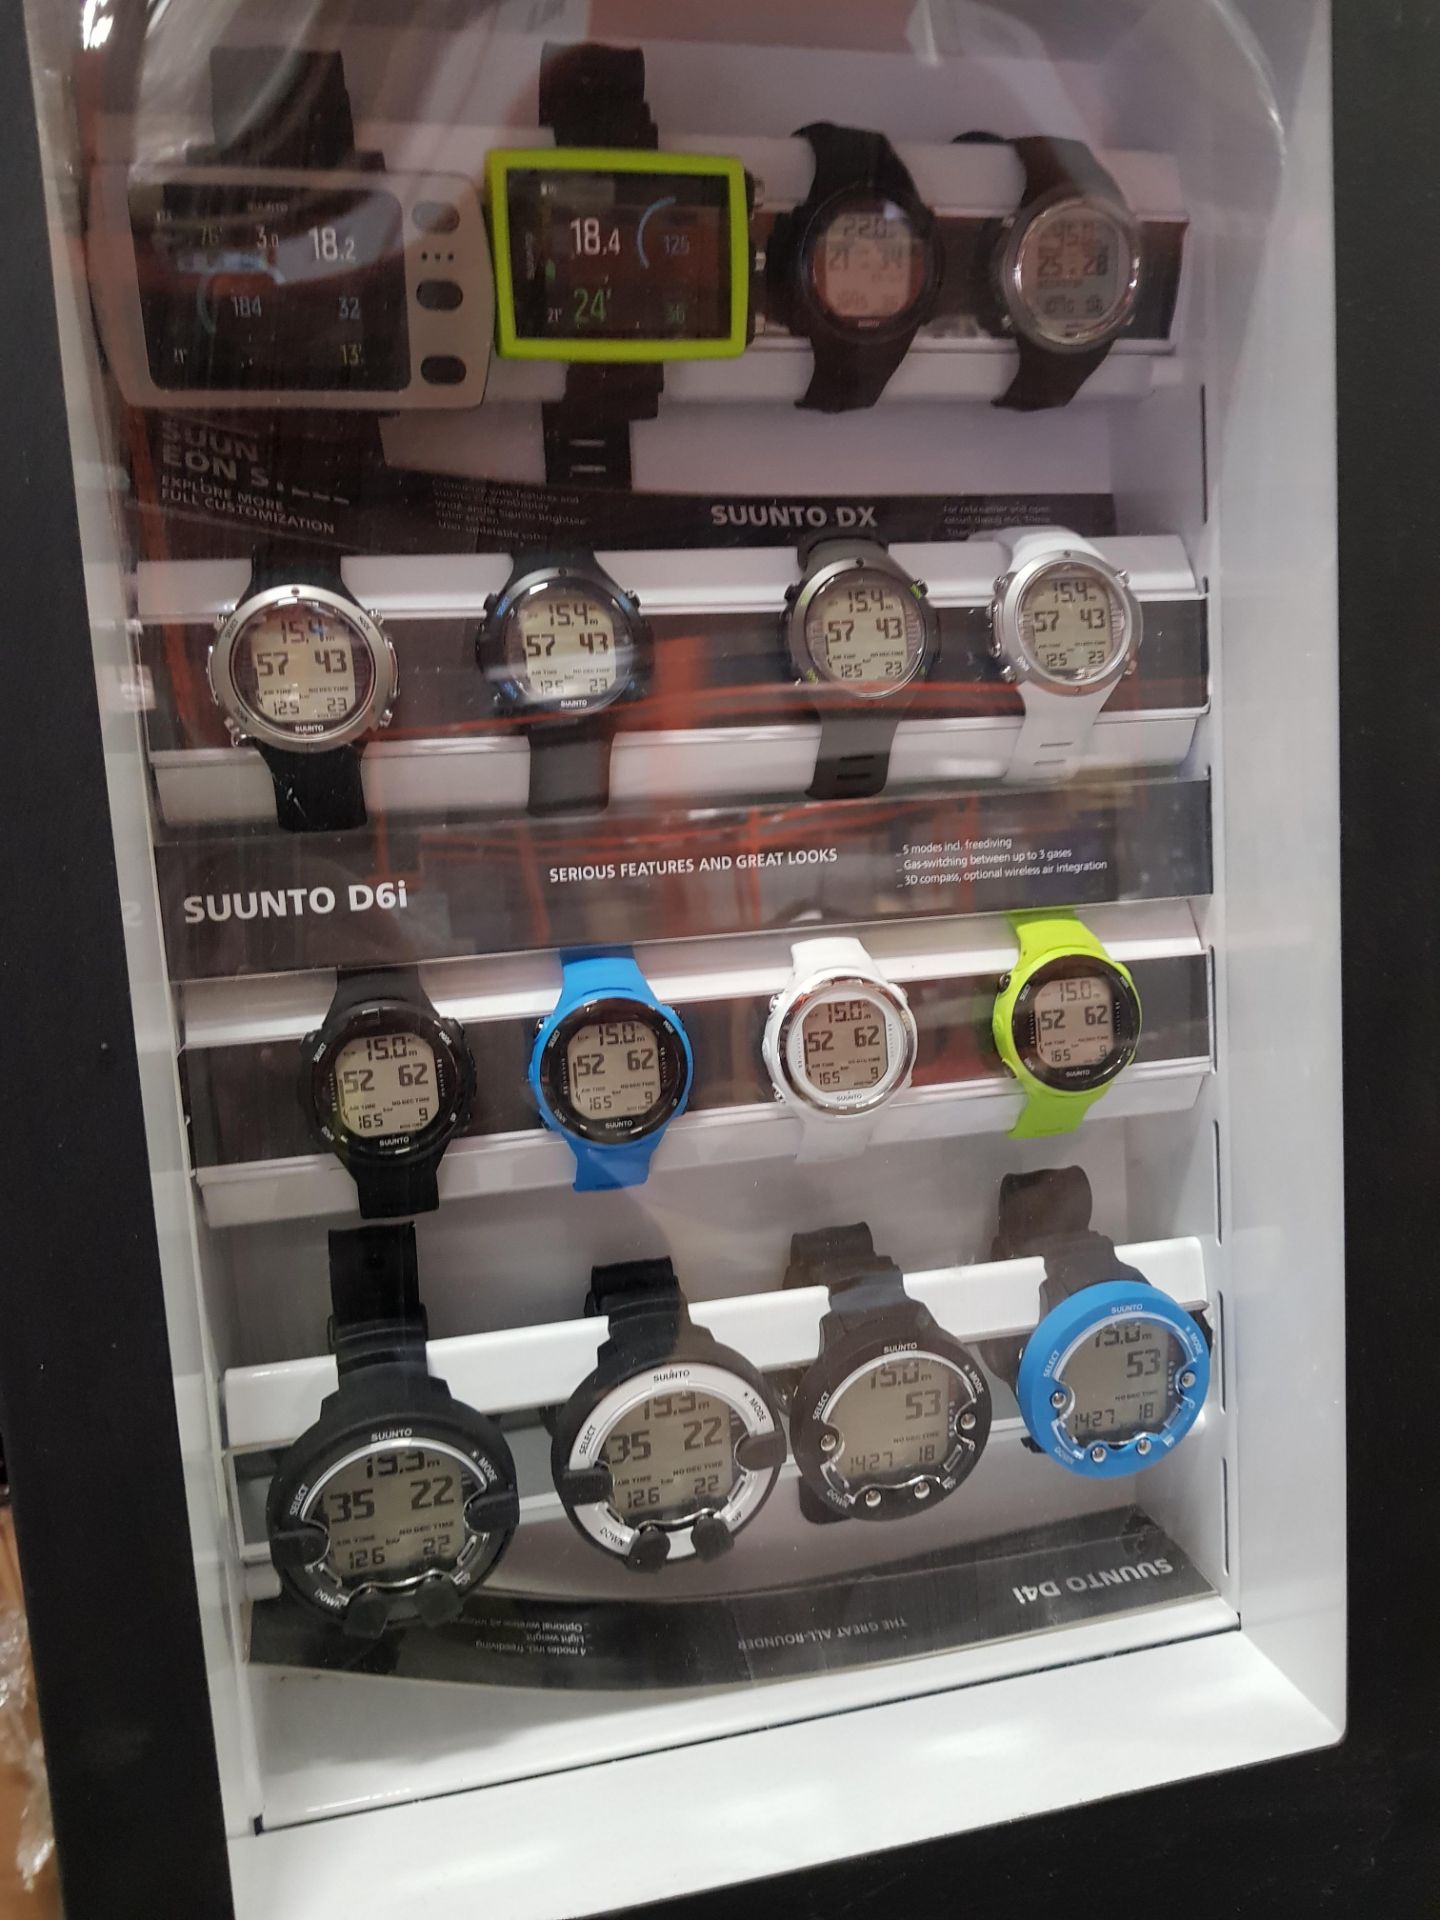 1 X SUUNTO WATCH DISPLAY STAND WITH 16 X DEMONSTRATION WATCHES - Image 2 of 2